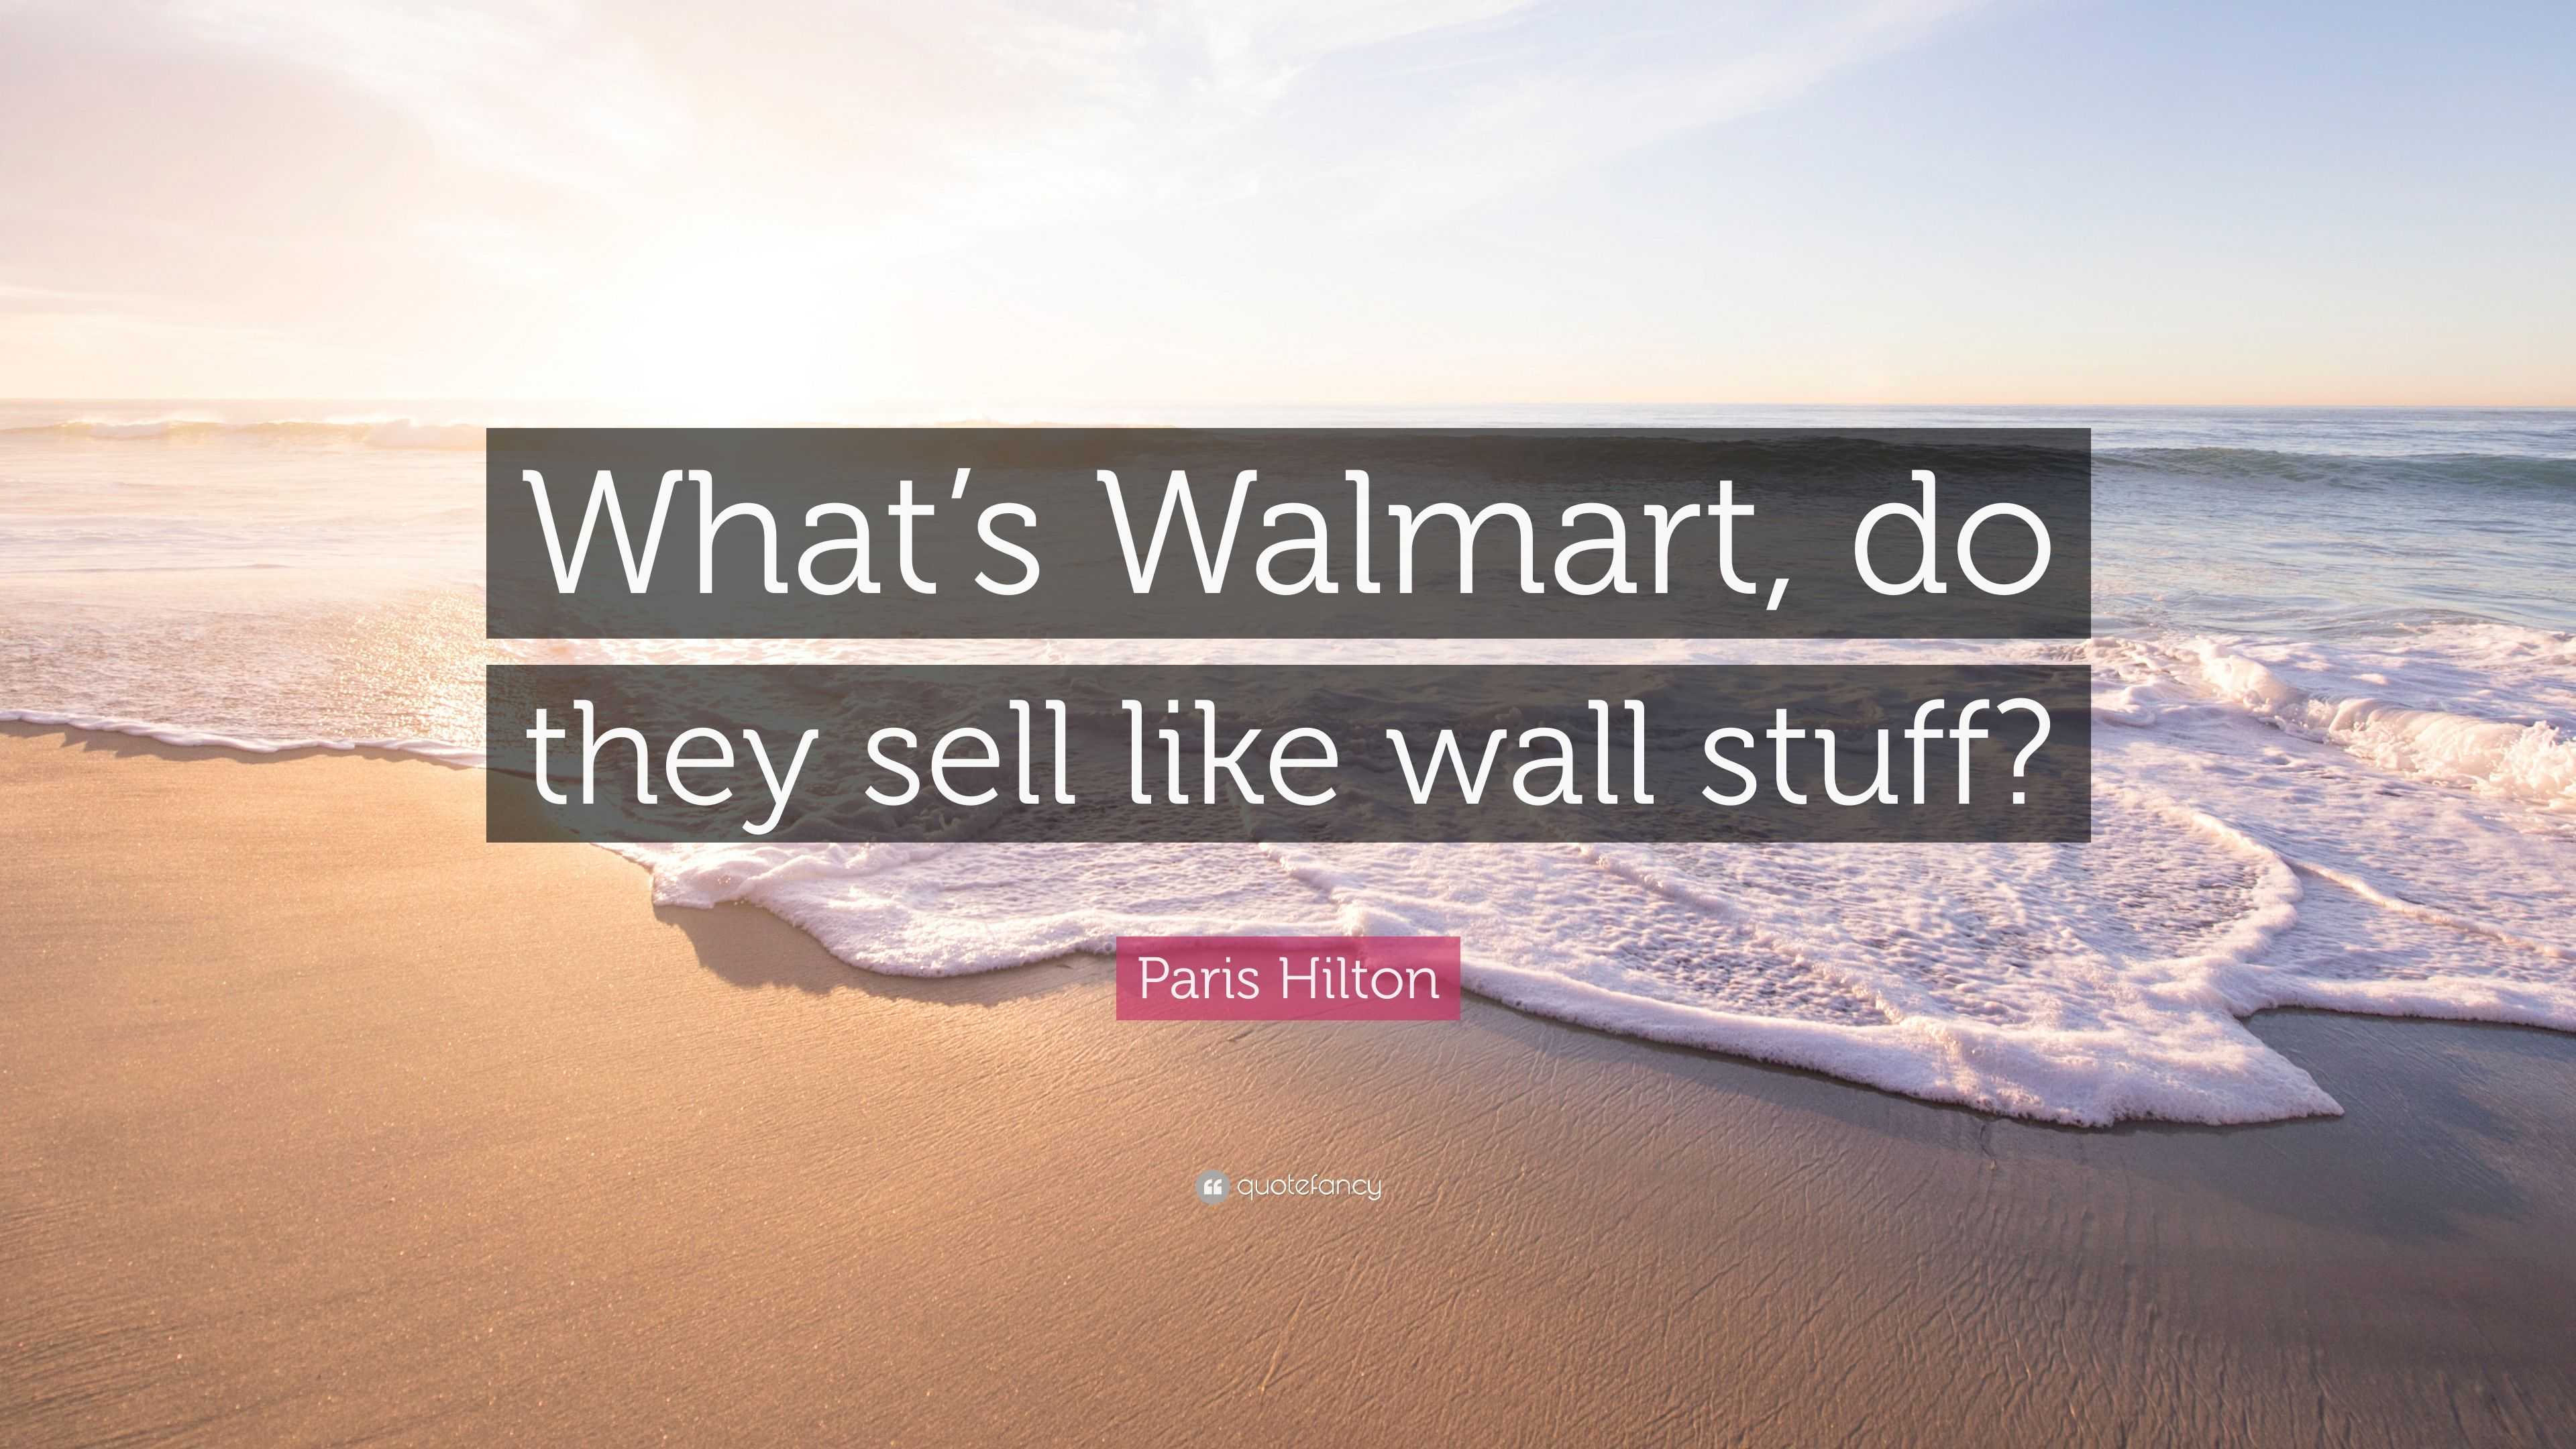 https://quotefancy.com/media/wallpaper/3840x2160/2259901-Paris-Hilton-Quote-What-s-Walmart-do-they-sell-like-wall-stuff.jpg